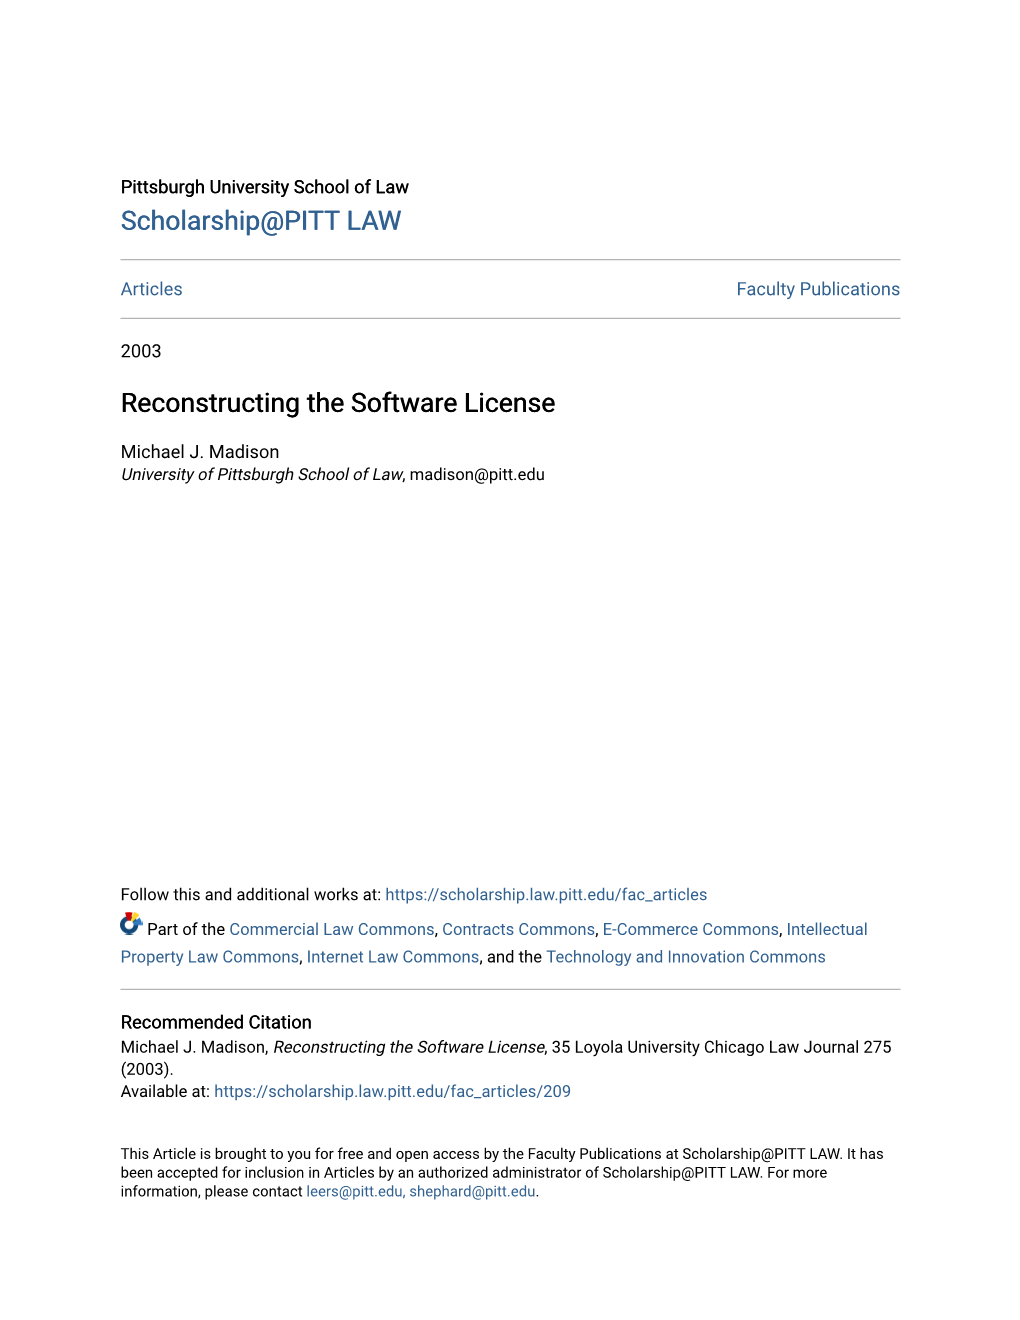 Reconstructing the Software License